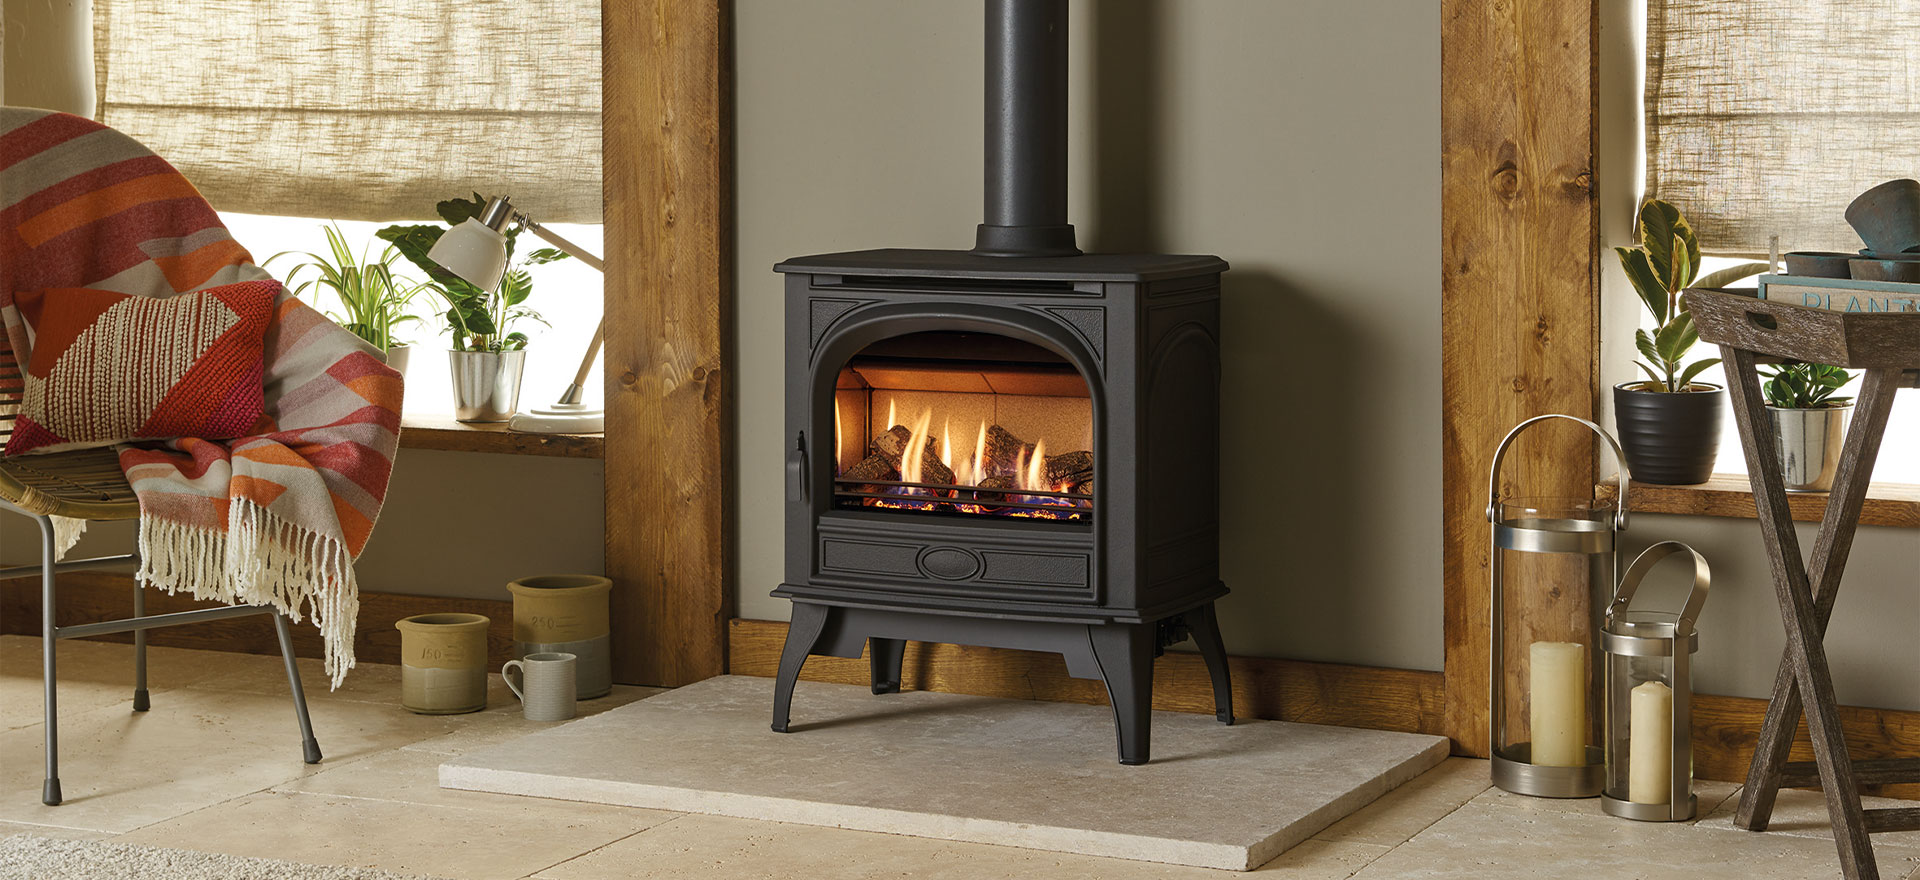 Why Choose a Dovre Gas Stove?